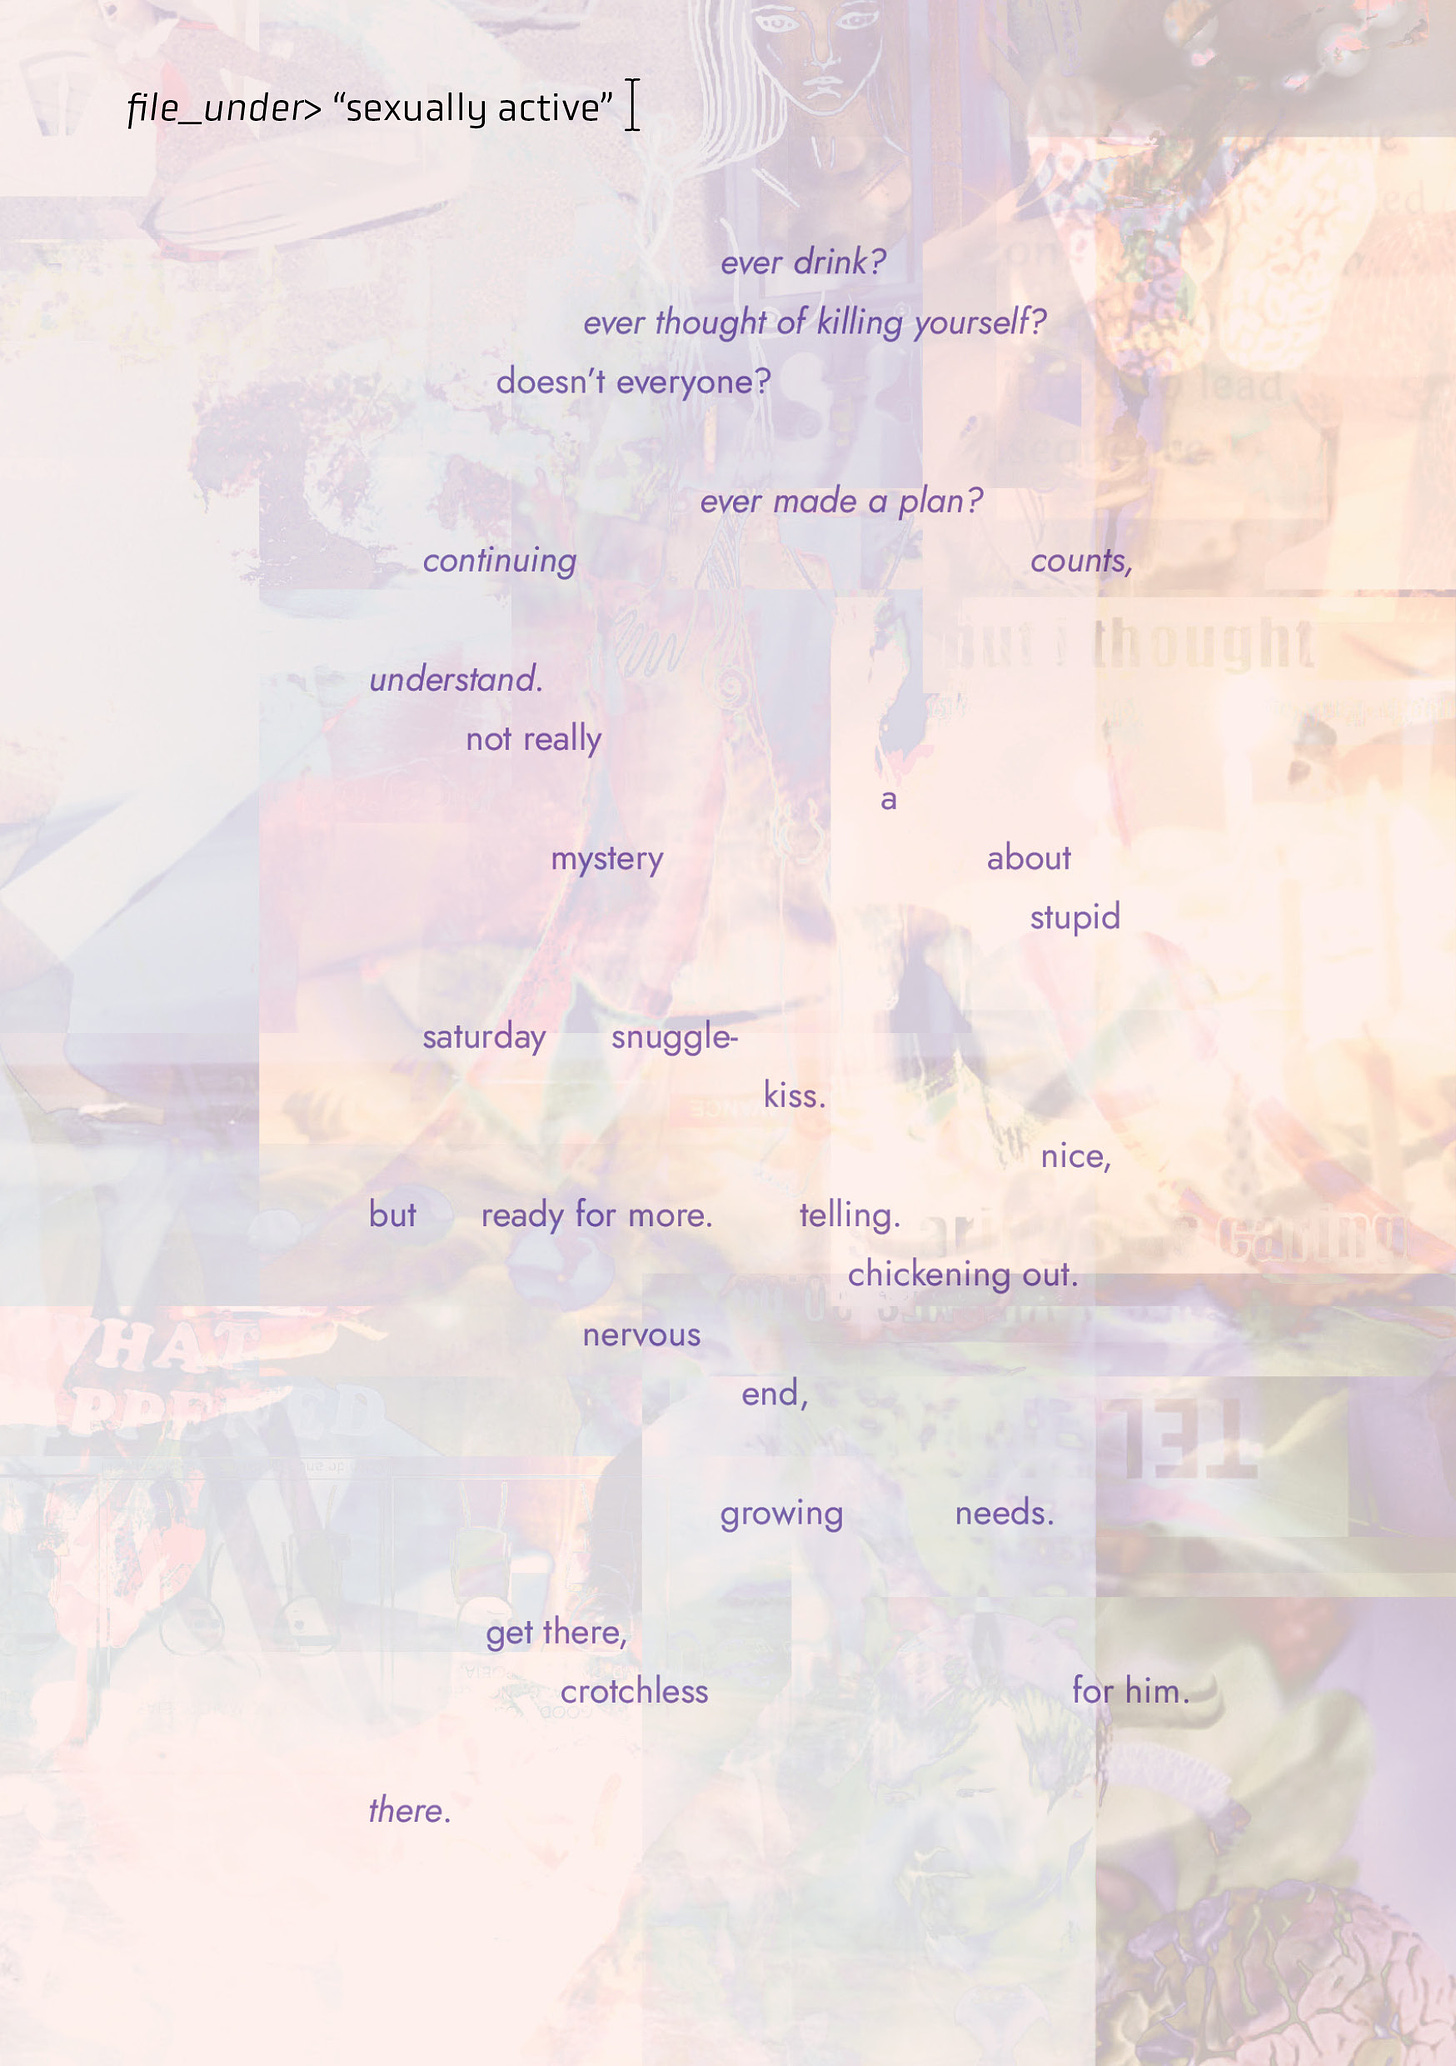 The background of the piece is a light purple digital collage of various elements that are clearly photographic, but layered over each other in a way that it's difficult to discern exactly what the images are. Dark text in the top right corner reads: "filed_under>’sexually active.’” The poem is scattered across the page and reads “ever drink? / ever thought of killing yourself? / doesn’t everyone? / ever made a plan? / continuing  counts, / understand. / not really / a / mystery	about / stupid / saturday      snuggle- kiss. / nice,/ but ready for more. telling. / chickening out. / nervous / end, / growing needs. / get there, / crotchless	for him. / there.”